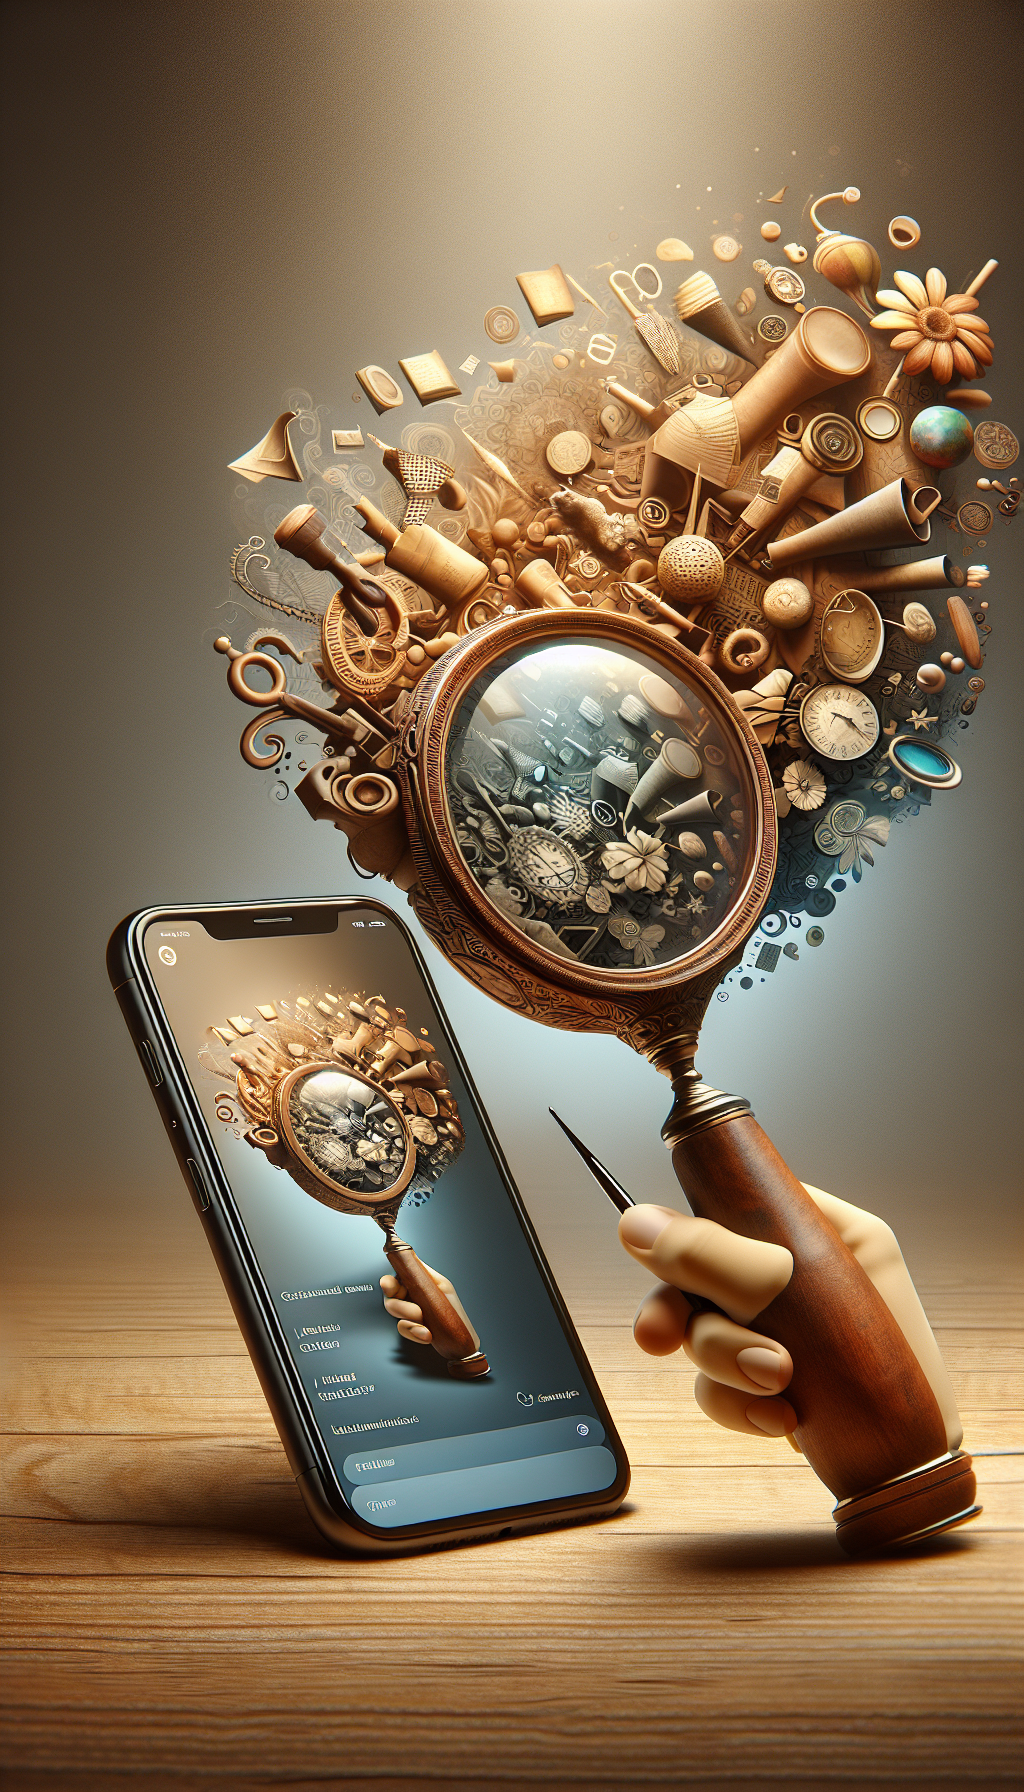 A whimsical juxtaposition of past and present: a vintage magnifying glass that seamlessly transitions into a sleek, modern smartphone. Through its lens, a sepia-toned world bursts into vibrant pixels, revealing the hidden history of antiques. The screen displays an intuitive 'Antique Identifier' app interface, unearthing tales and timelines as fingertips dance across the age-old artifacts brought to life.